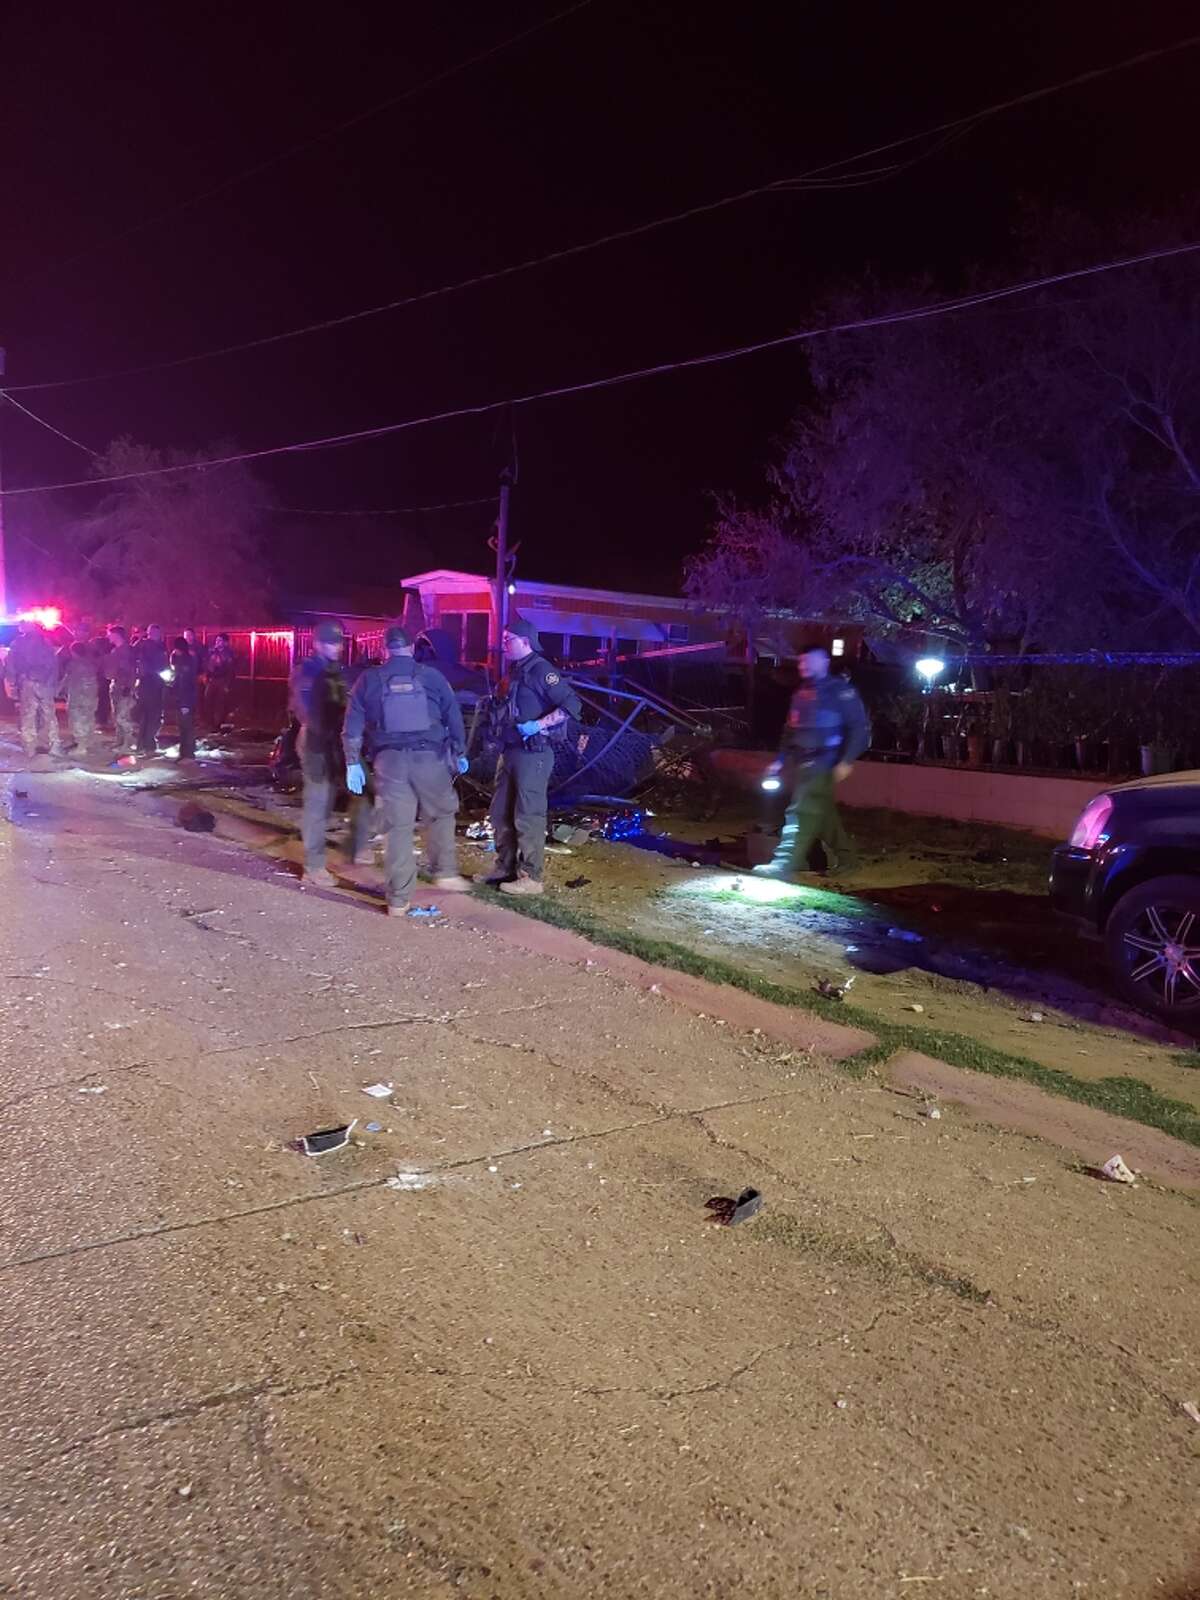 Scene from the crime scene taken around 4 a.m. after a speed chase headed by Border Patrol led to a vehicle collision causing four casualties in Rio Bravo, Texas on Feb. 25, 2023.